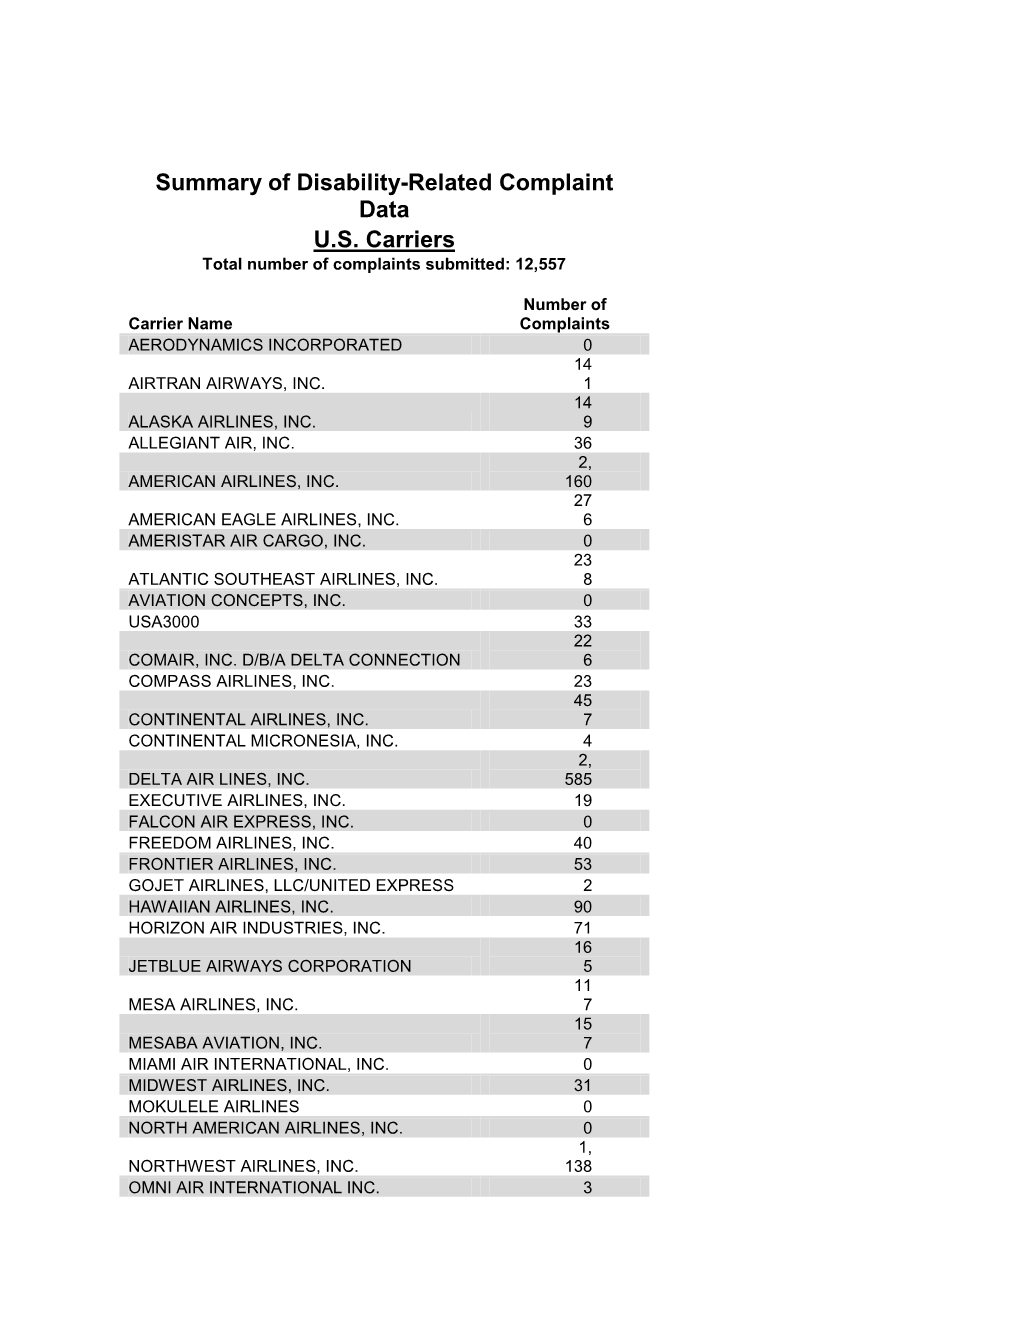 Summary of Disability-Related Complaint Data U.S